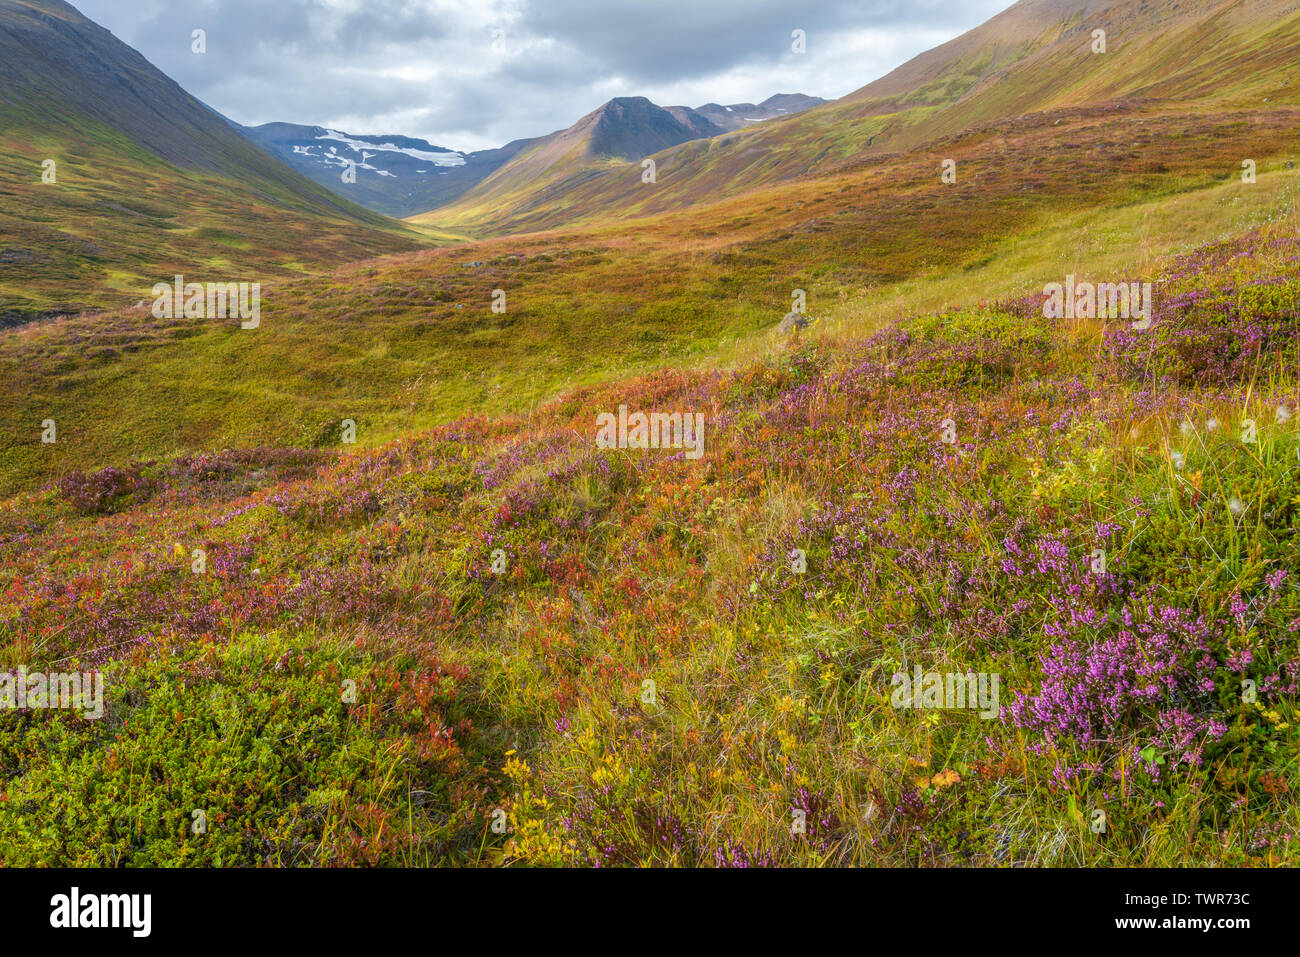 Icelandic mountains and arctic tundra, arctic mountainous landscape. Wildflowers bloom in Iceland's mountains, hiking in the tundra. Stock Photo